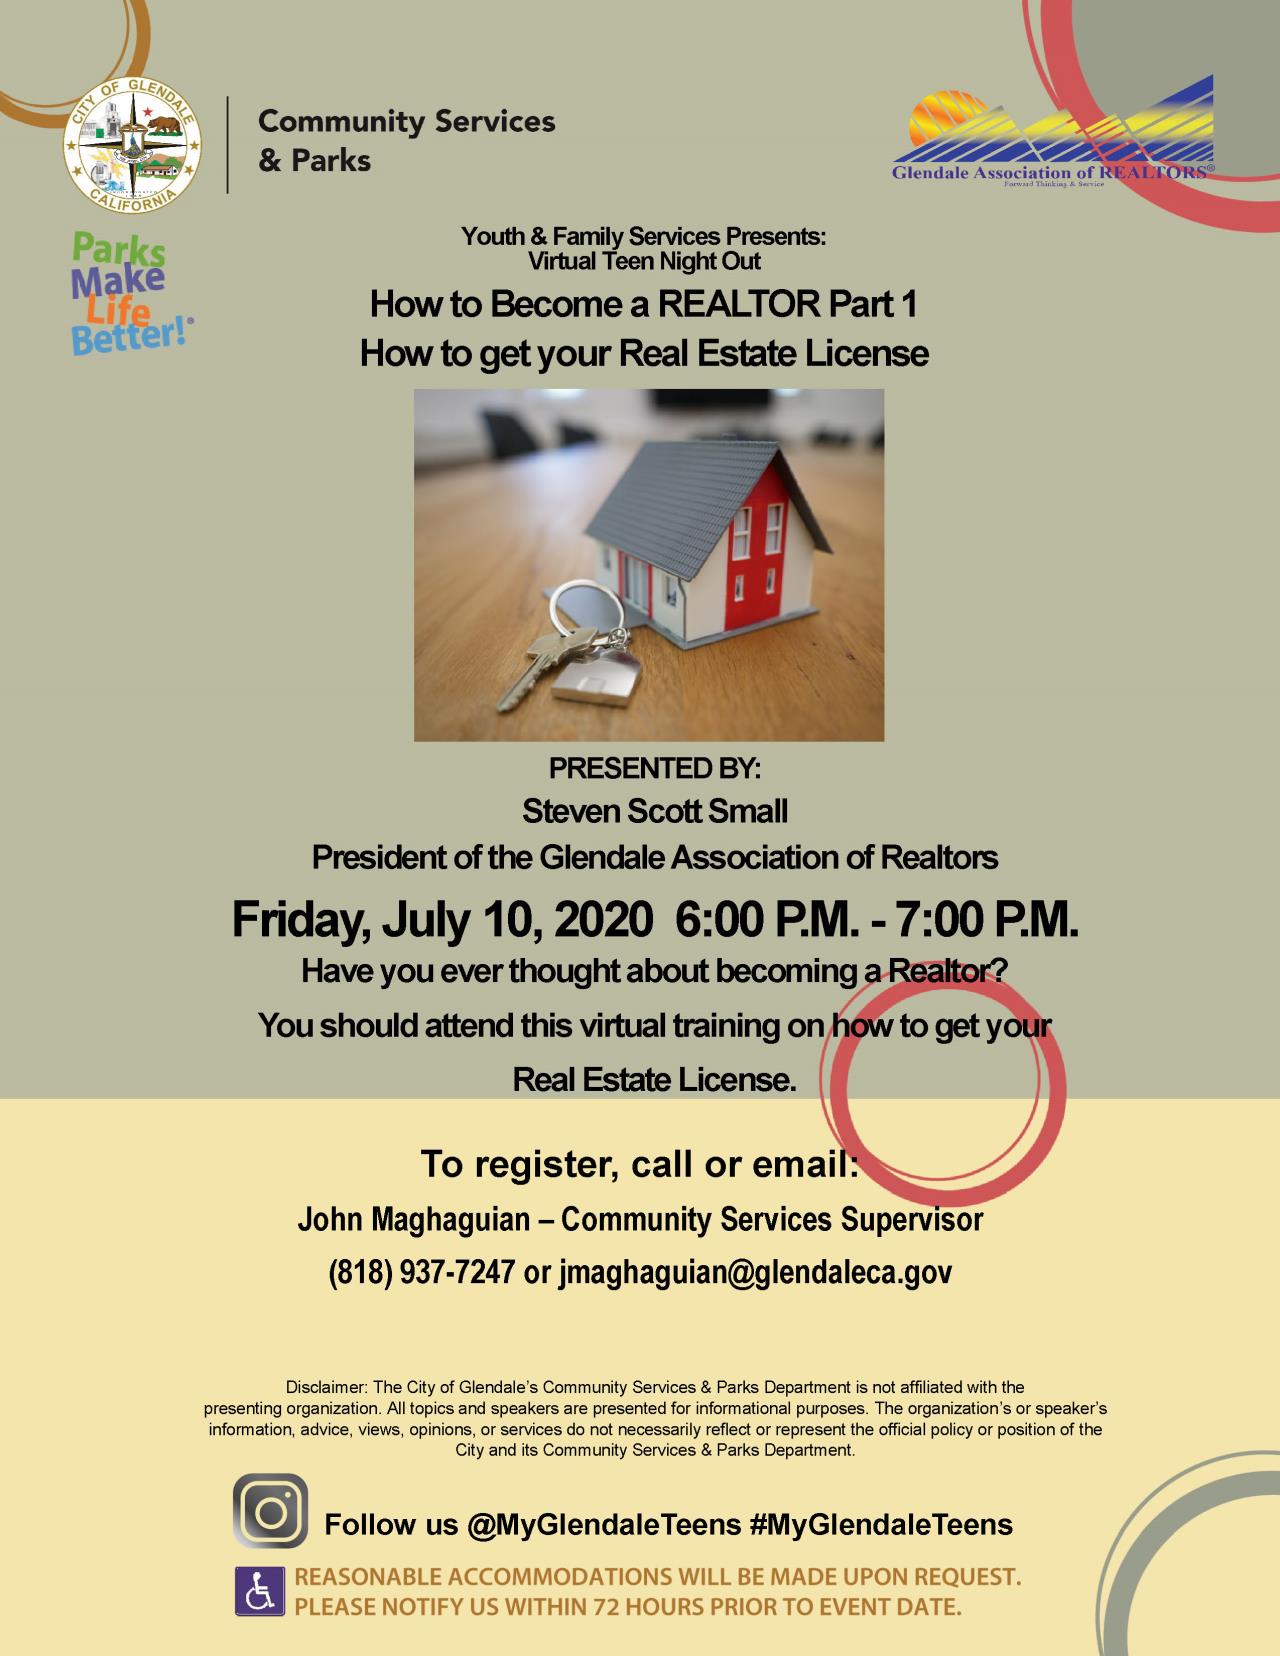 Virtual Teen Night Out Presents How to Become a Realtor Part 1 How to Get Your Real Estate License